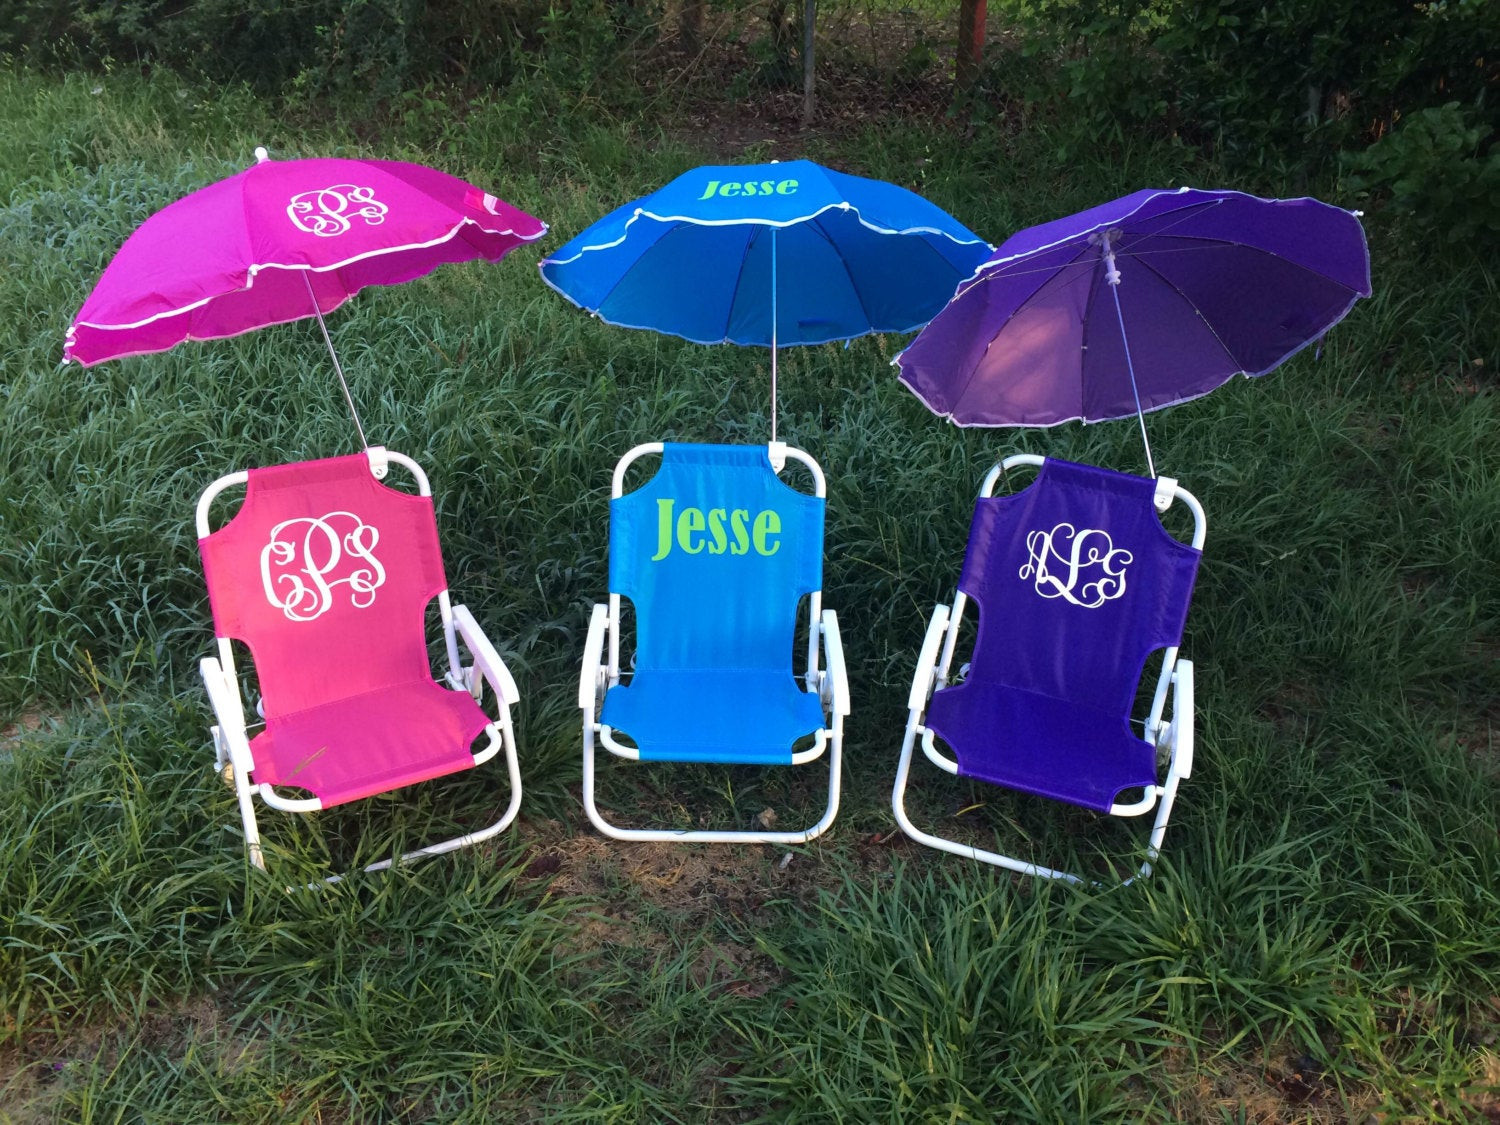 Beach Chair For Kids
 Monogrammed Kids beach chair with umbrella by